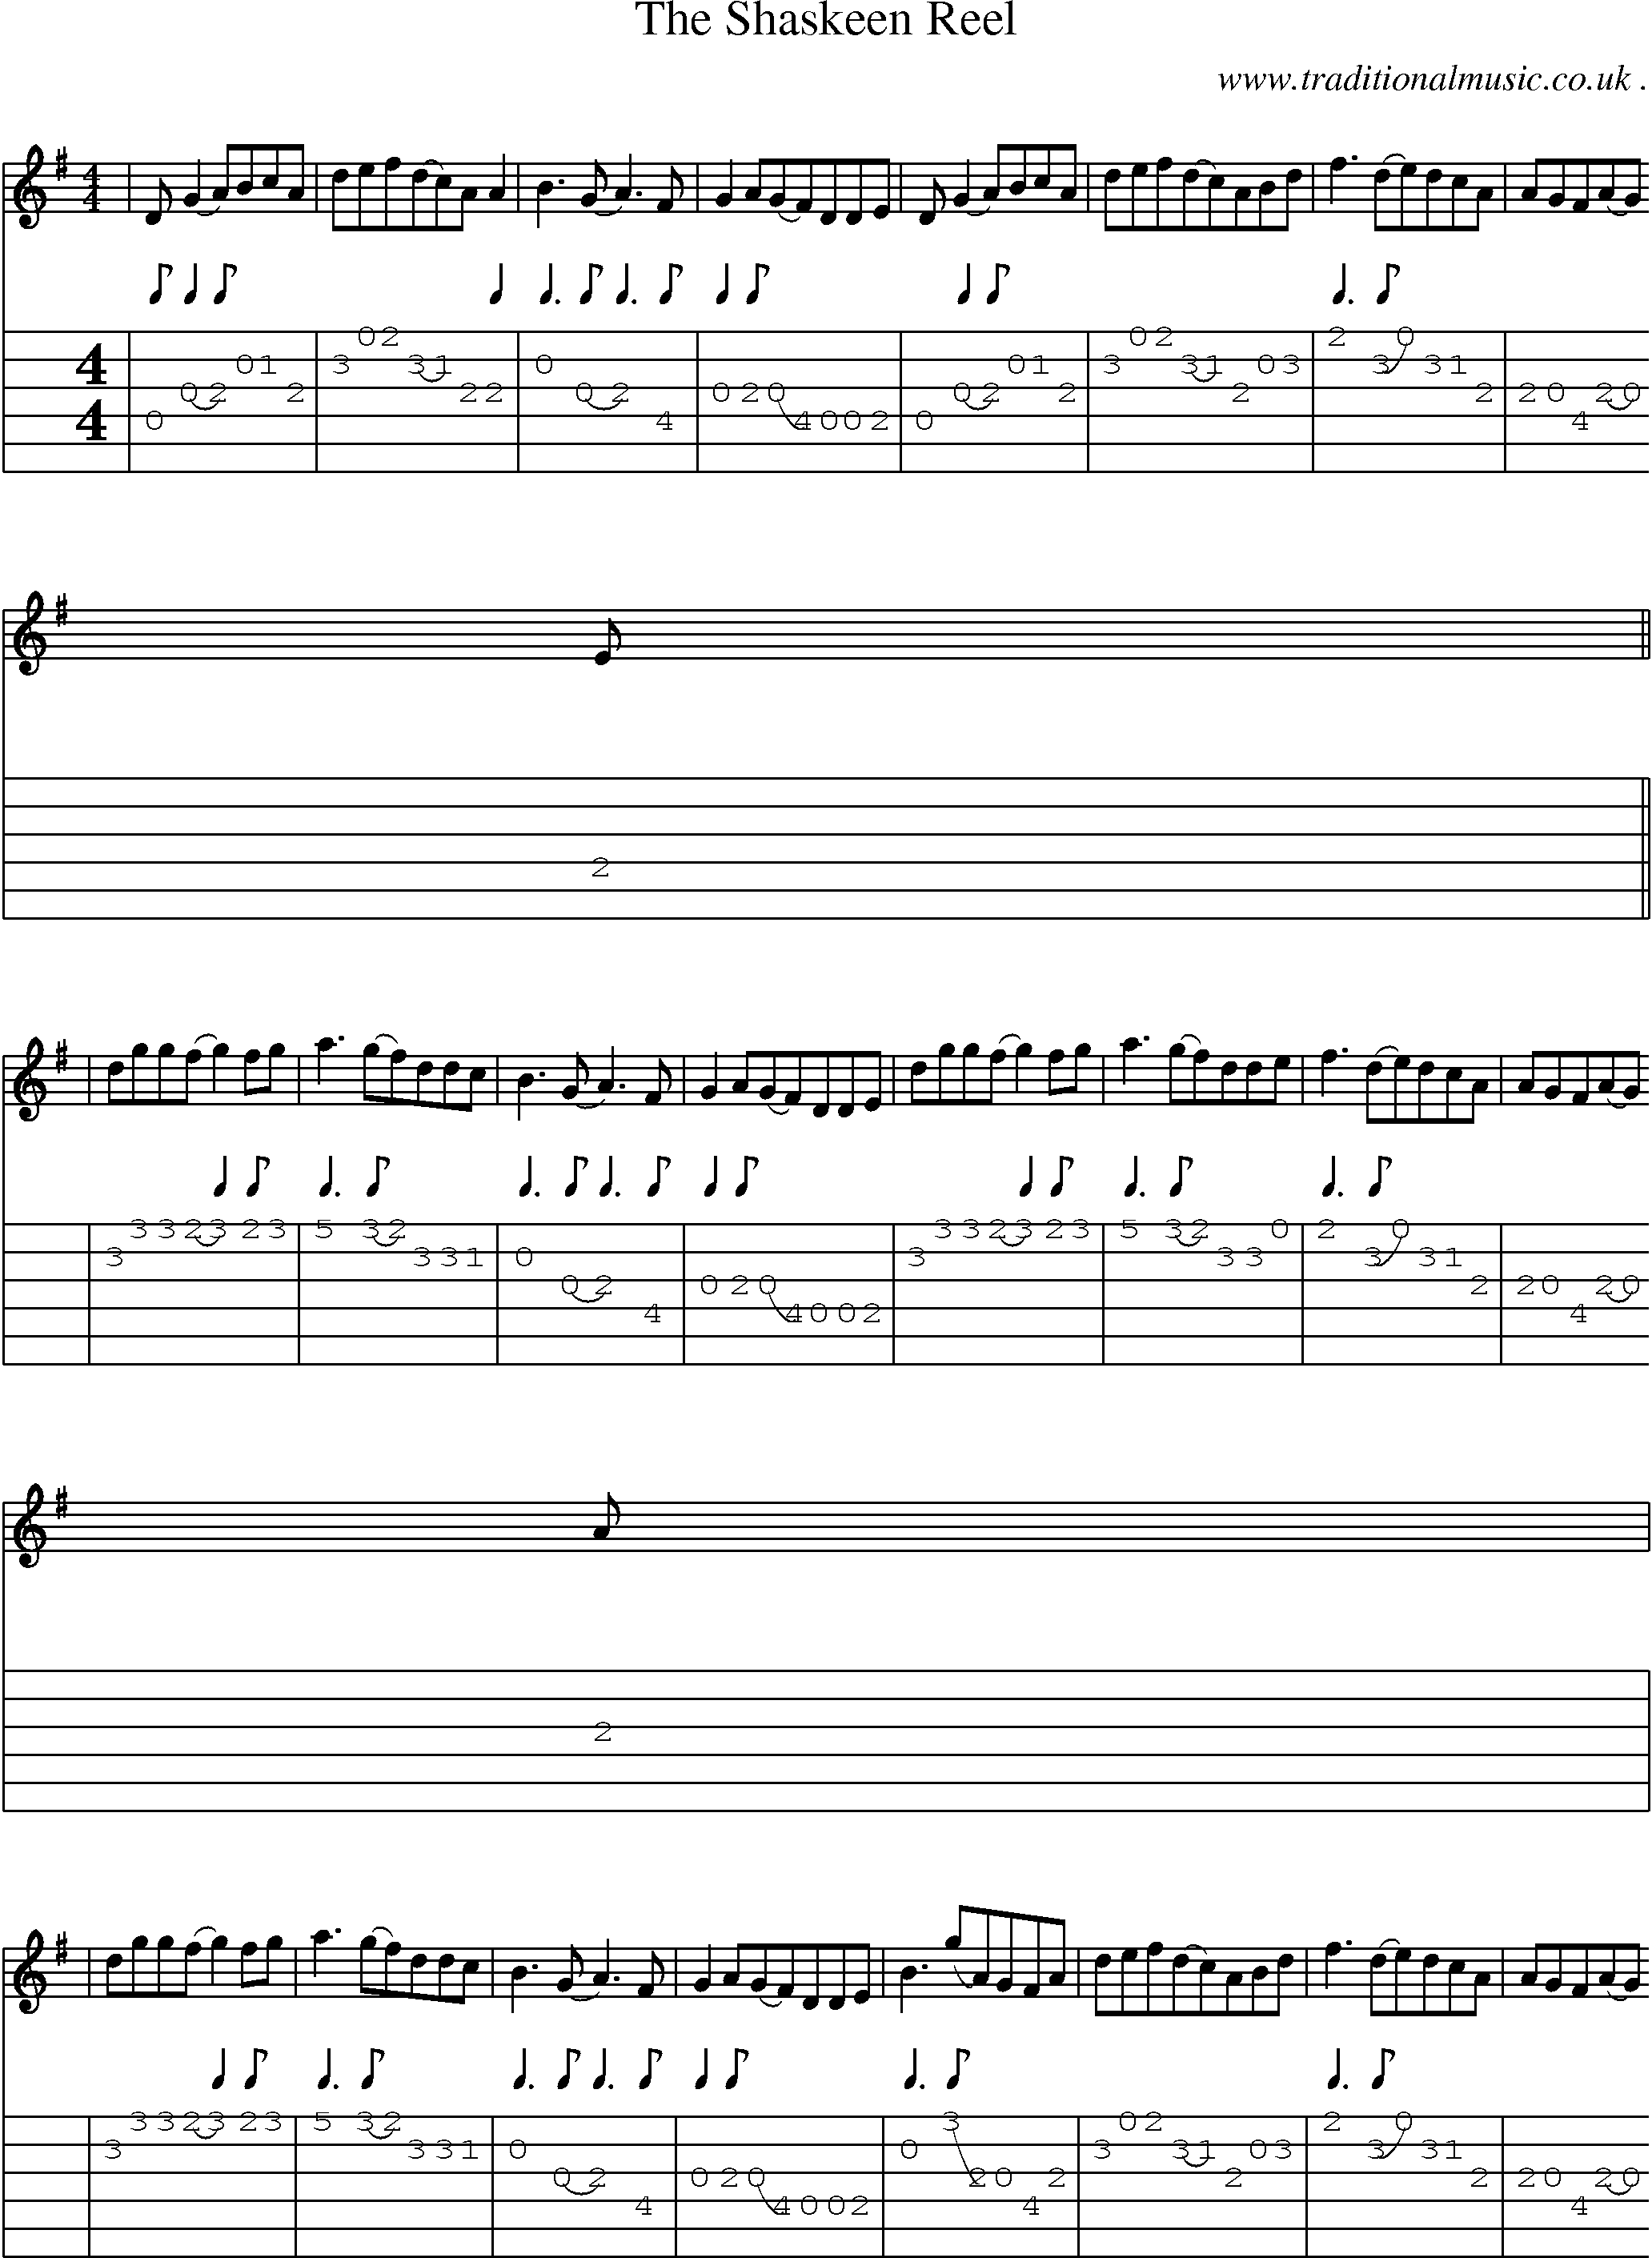 Sheet-Music and Guitar Tabs for The Shaskeen Reel